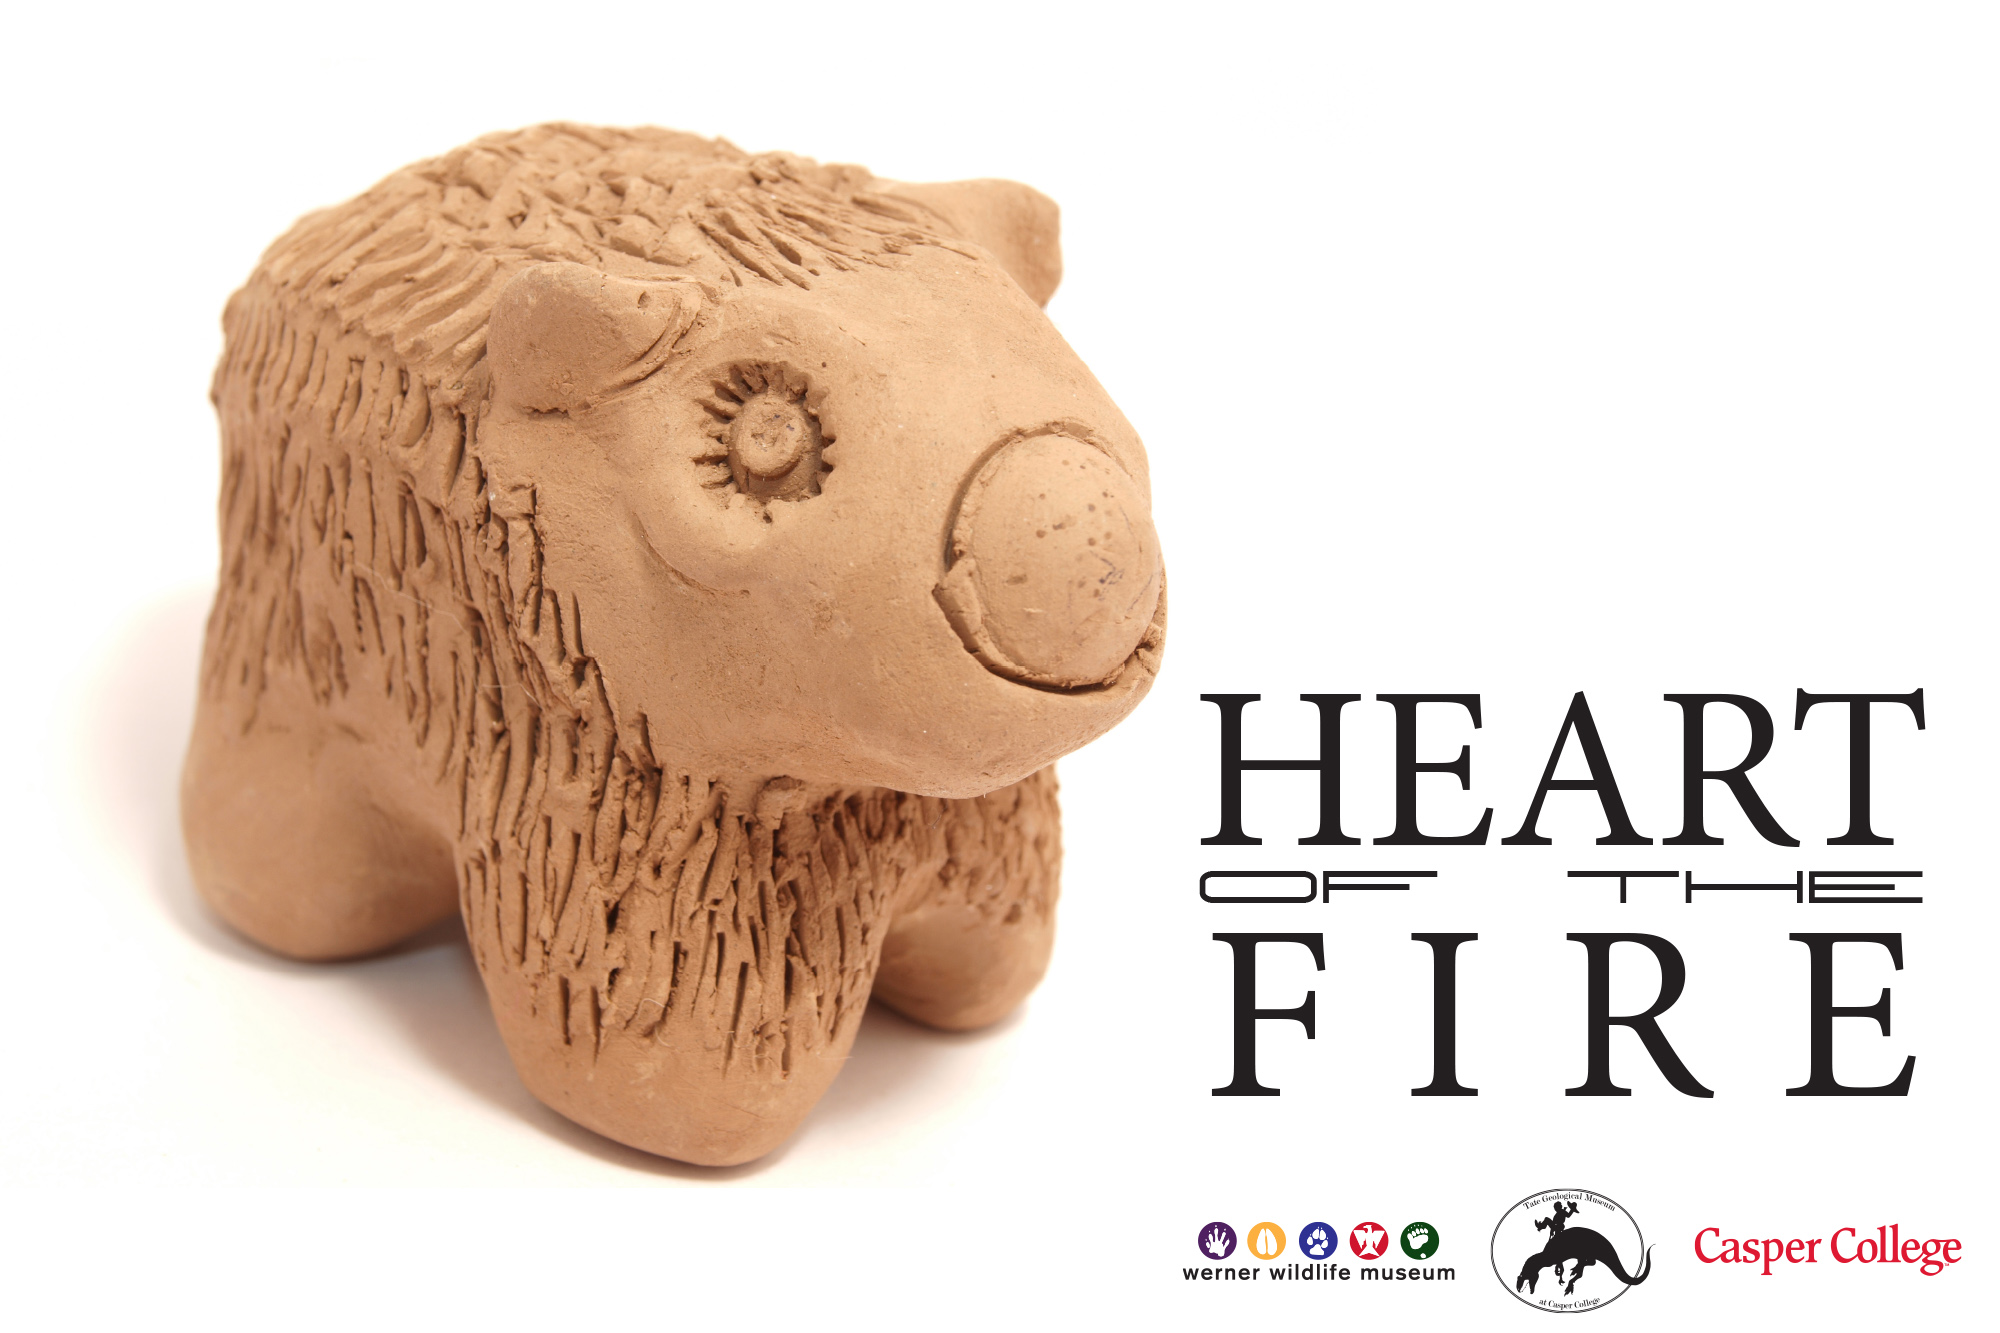 Image for "Heart of Fire" ceramic show.